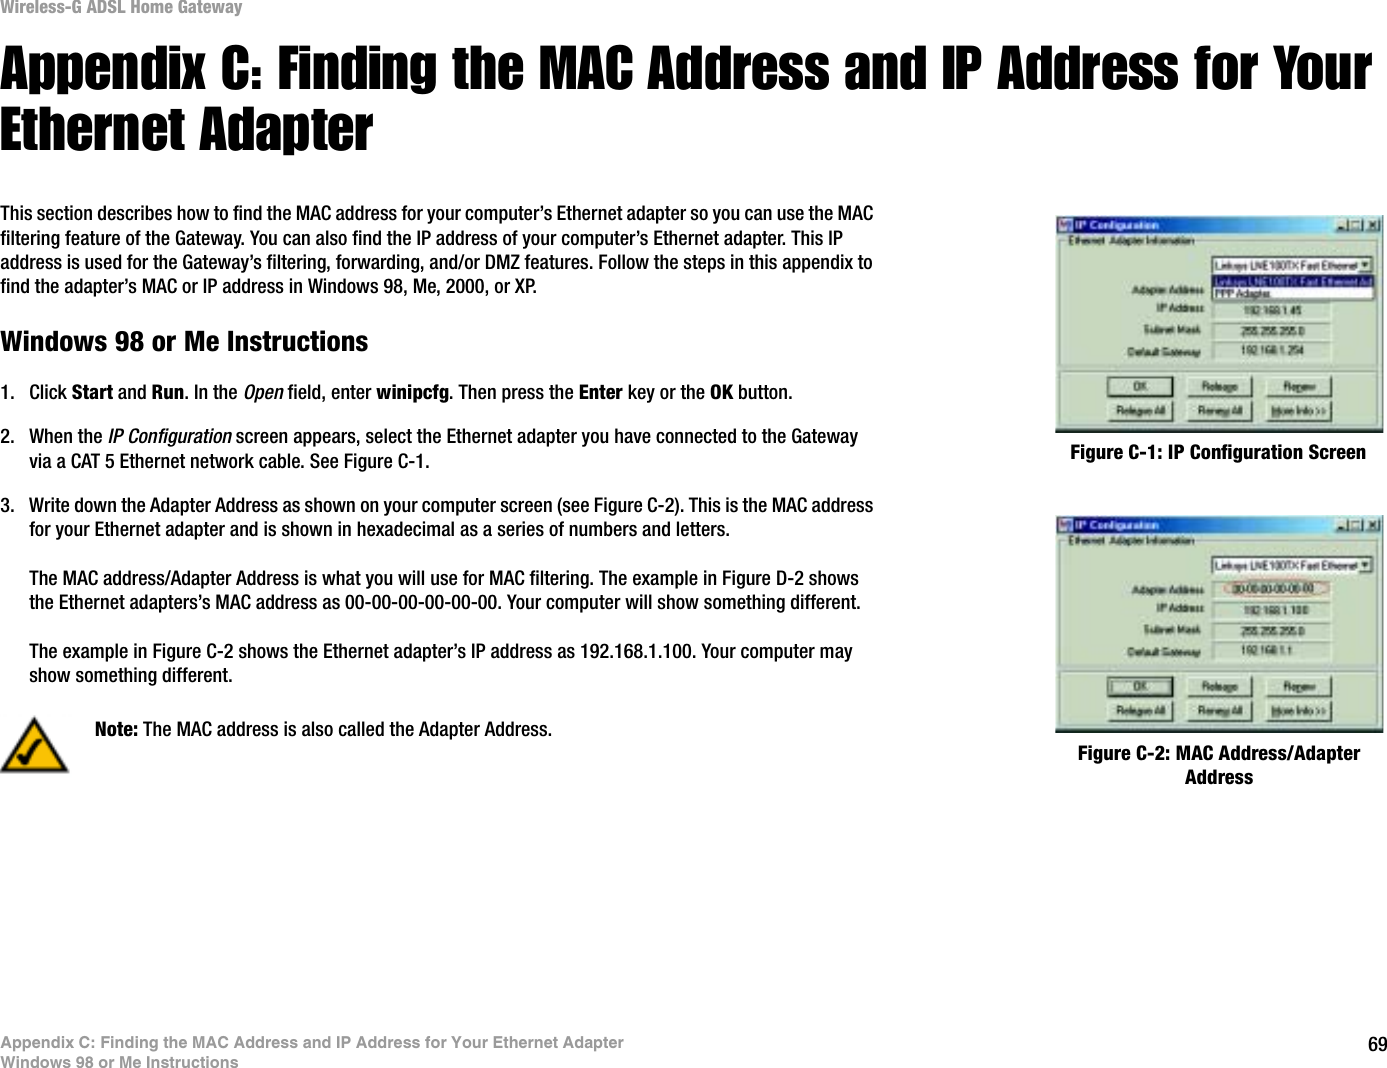 69Appendix C: Finding the MAC Address and IP Address for Your Ethernet AdapterWindows 98 or Me InstructionsWireless-G ADSL Home GatewayAppendix C: Finding the MAC Address and IP Address for Your Ethernet AdapterThis section describes how to find the MAC address for your computer’s Ethernet adapter so you can use the MAC filtering feature of the Gateway. You can also find the IP address of your computer’s Ethernet adapter. This IP address is used for the Gateway’s filtering, forwarding, and/or DMZ features. Follow the steps in this appendix to find the adapter’s MAC or IP address in Windows 98, Me, 2000, or XP.Windows 98 or Me Instructions1. Click Start and Run. In the Open field, enter winipcfg. Then press the Enter key or the OK button. 2. When the IP Configuration screen appears, select the Ethernet adapter you have connected to the Gateway via a CAT 5 Ethernet network cable. See Figure C-1.3. Write down the Adapter Address as shown on your computer screen (see Figure C-2). This is the MAC address for your Ethernet adapter and is shown in hexadecimal as a series of numbers and letters.The MAC address/Adapter Address is what you will use for MAC filtering. The example in Figure D-2 shows the Ethernet adapters’s MAC address as 00-00-00-00-00-00. Your computer will show something different.The example in Figure C-2 shows the Ethernet adapter’s IP address as 192.168.1.100. Your computer may show something different.Figure C-2: MAC Address/Adapter AddressFigure C-1: IP Configuration ScreenNote: The MAC address is also called the Adapter Address.